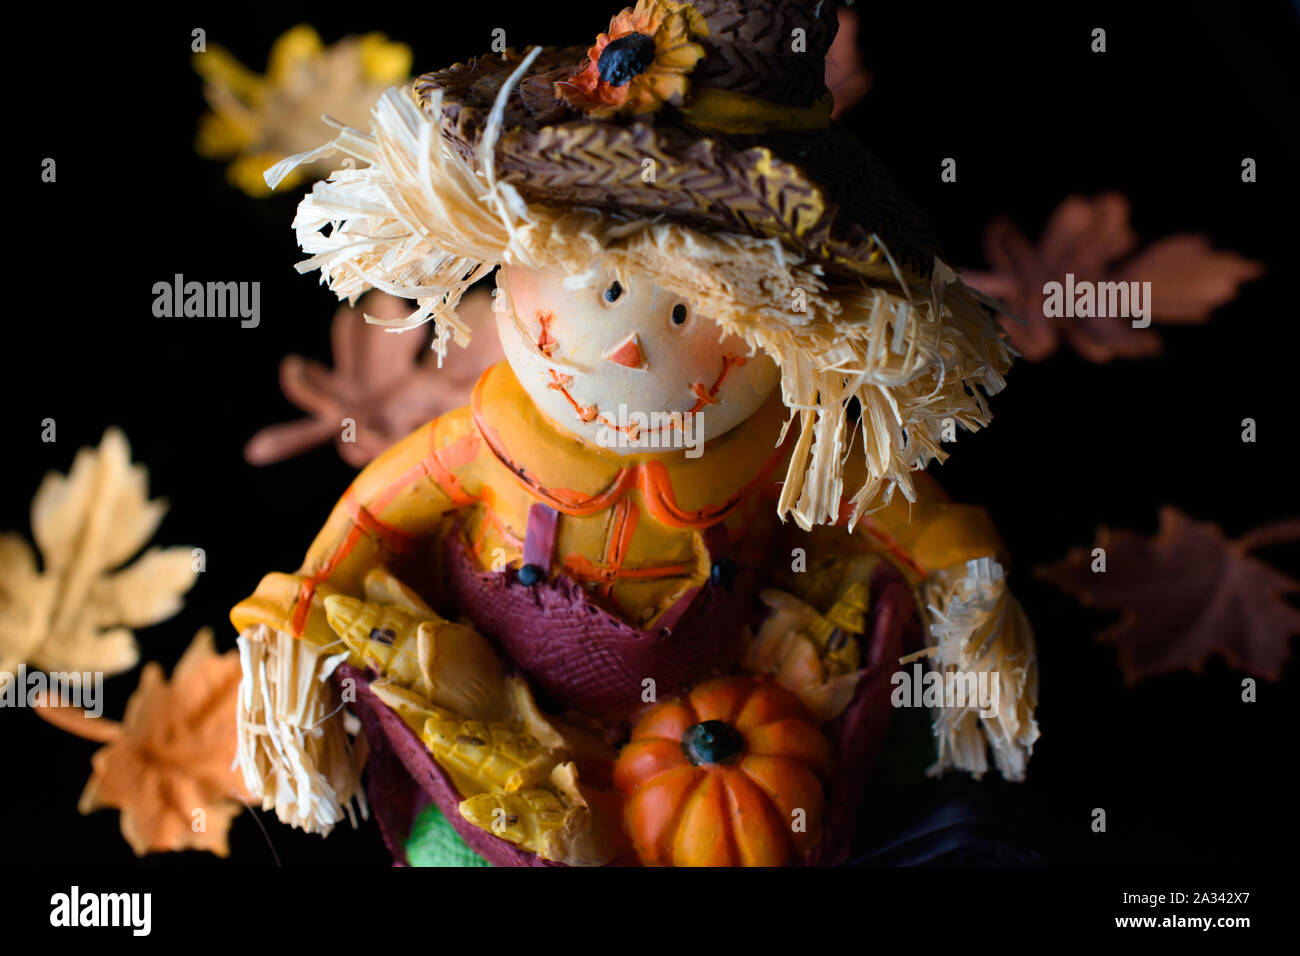 Adorable Happy Scarecrow Figurine Seated Among a Bed of Autumn Leaves Stock Photo